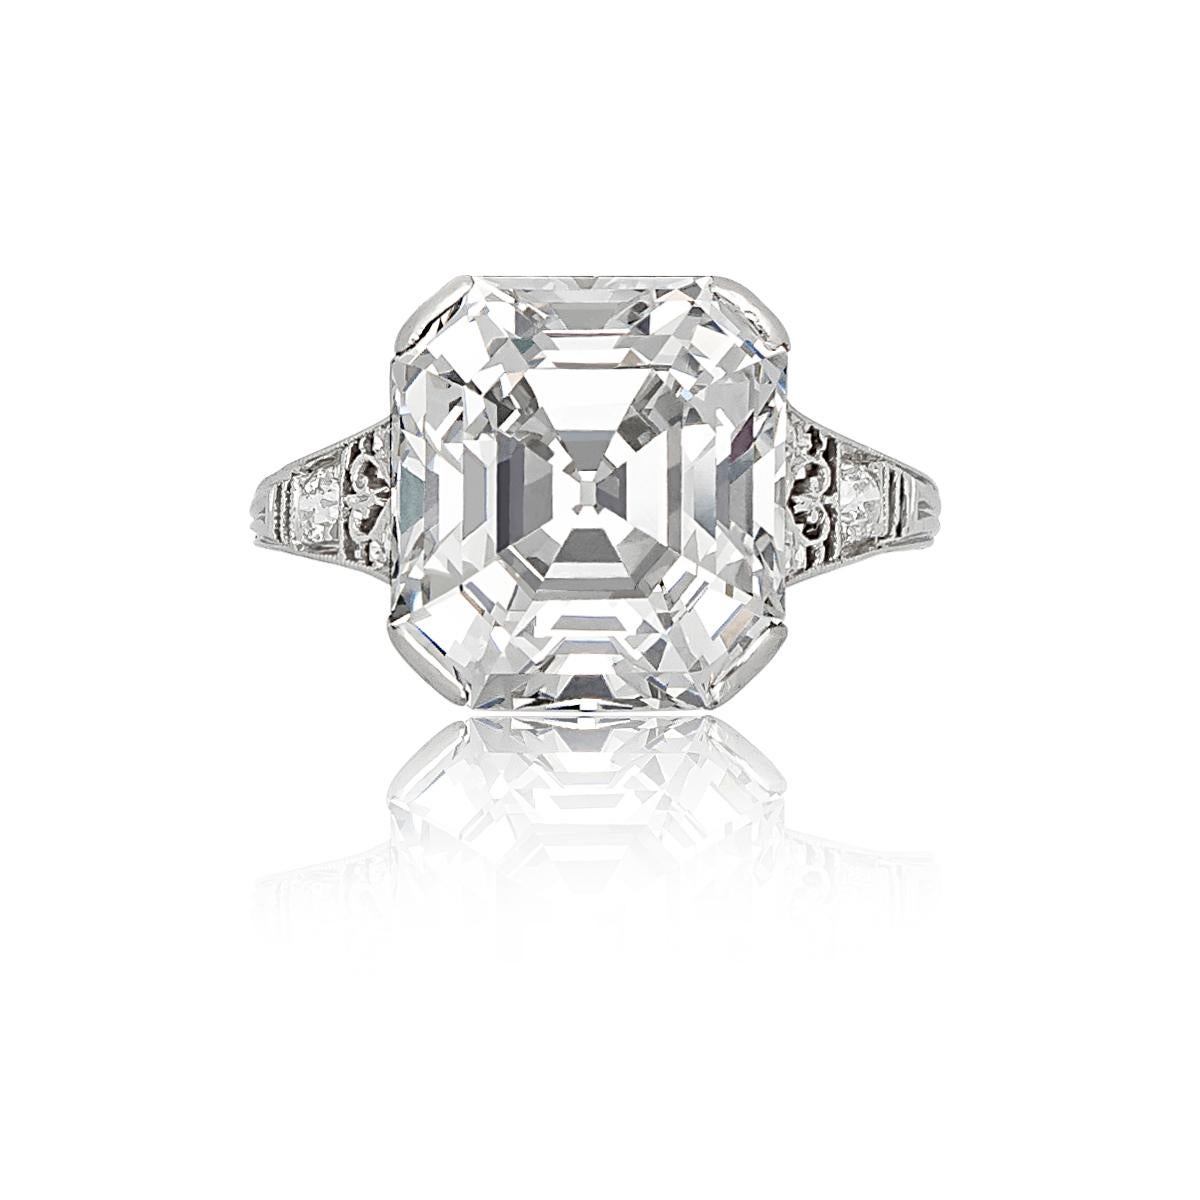 Tiffany & Co Asscher Cut Diamond Ring with a 7.31Ct Asscher Cut Diamond, D color, VVS2 Clarity Accompanied by GIA report no. 5151435546 stating that the diamond is D color, VVS2 clarity. Together with a letter from the GIA stating that the diamond